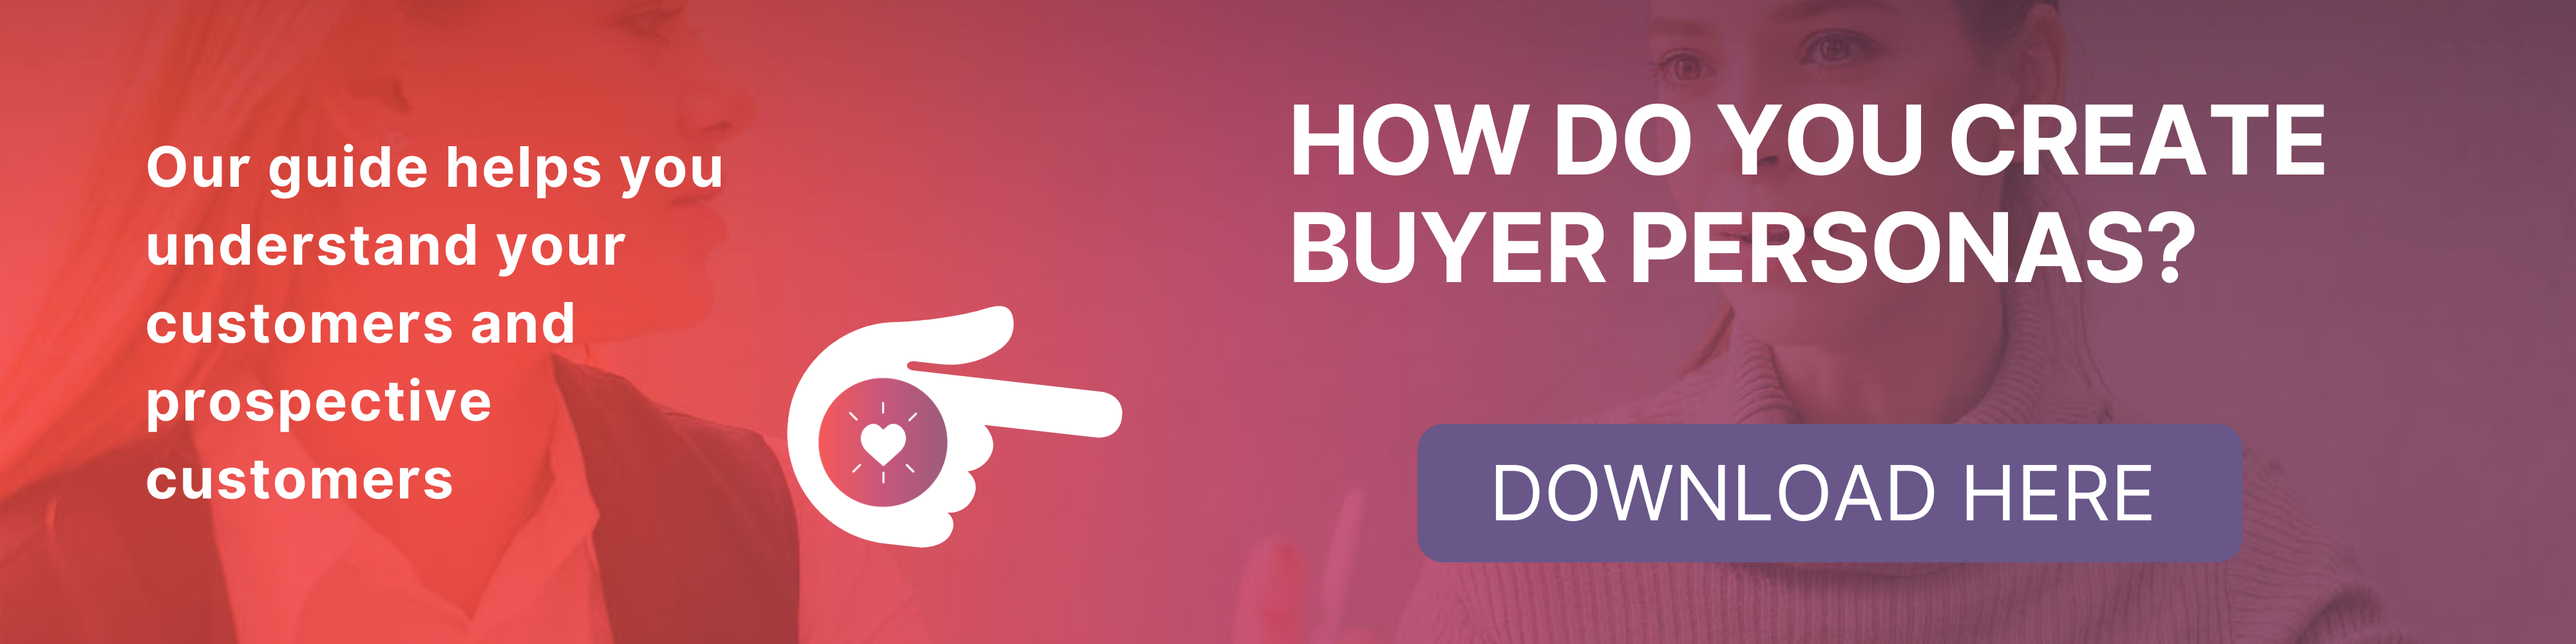 Buyer persona guide